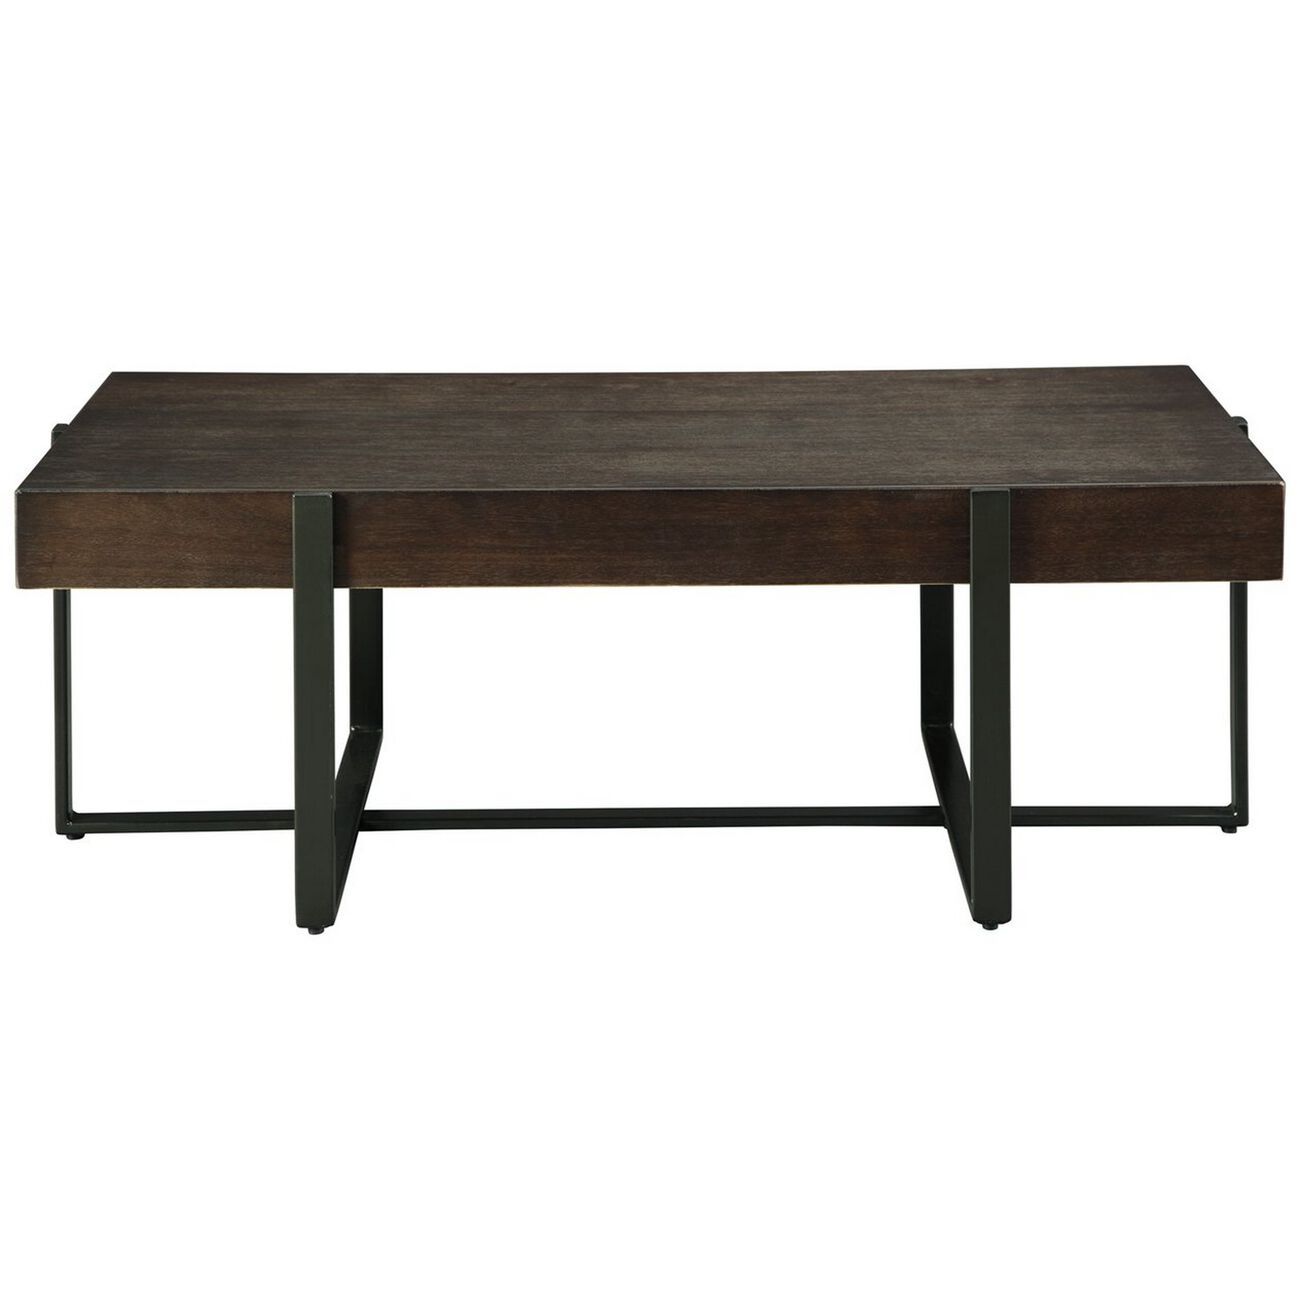 Rectangular Wooden Top Cocktail Table with Metal Base, Brown and Black